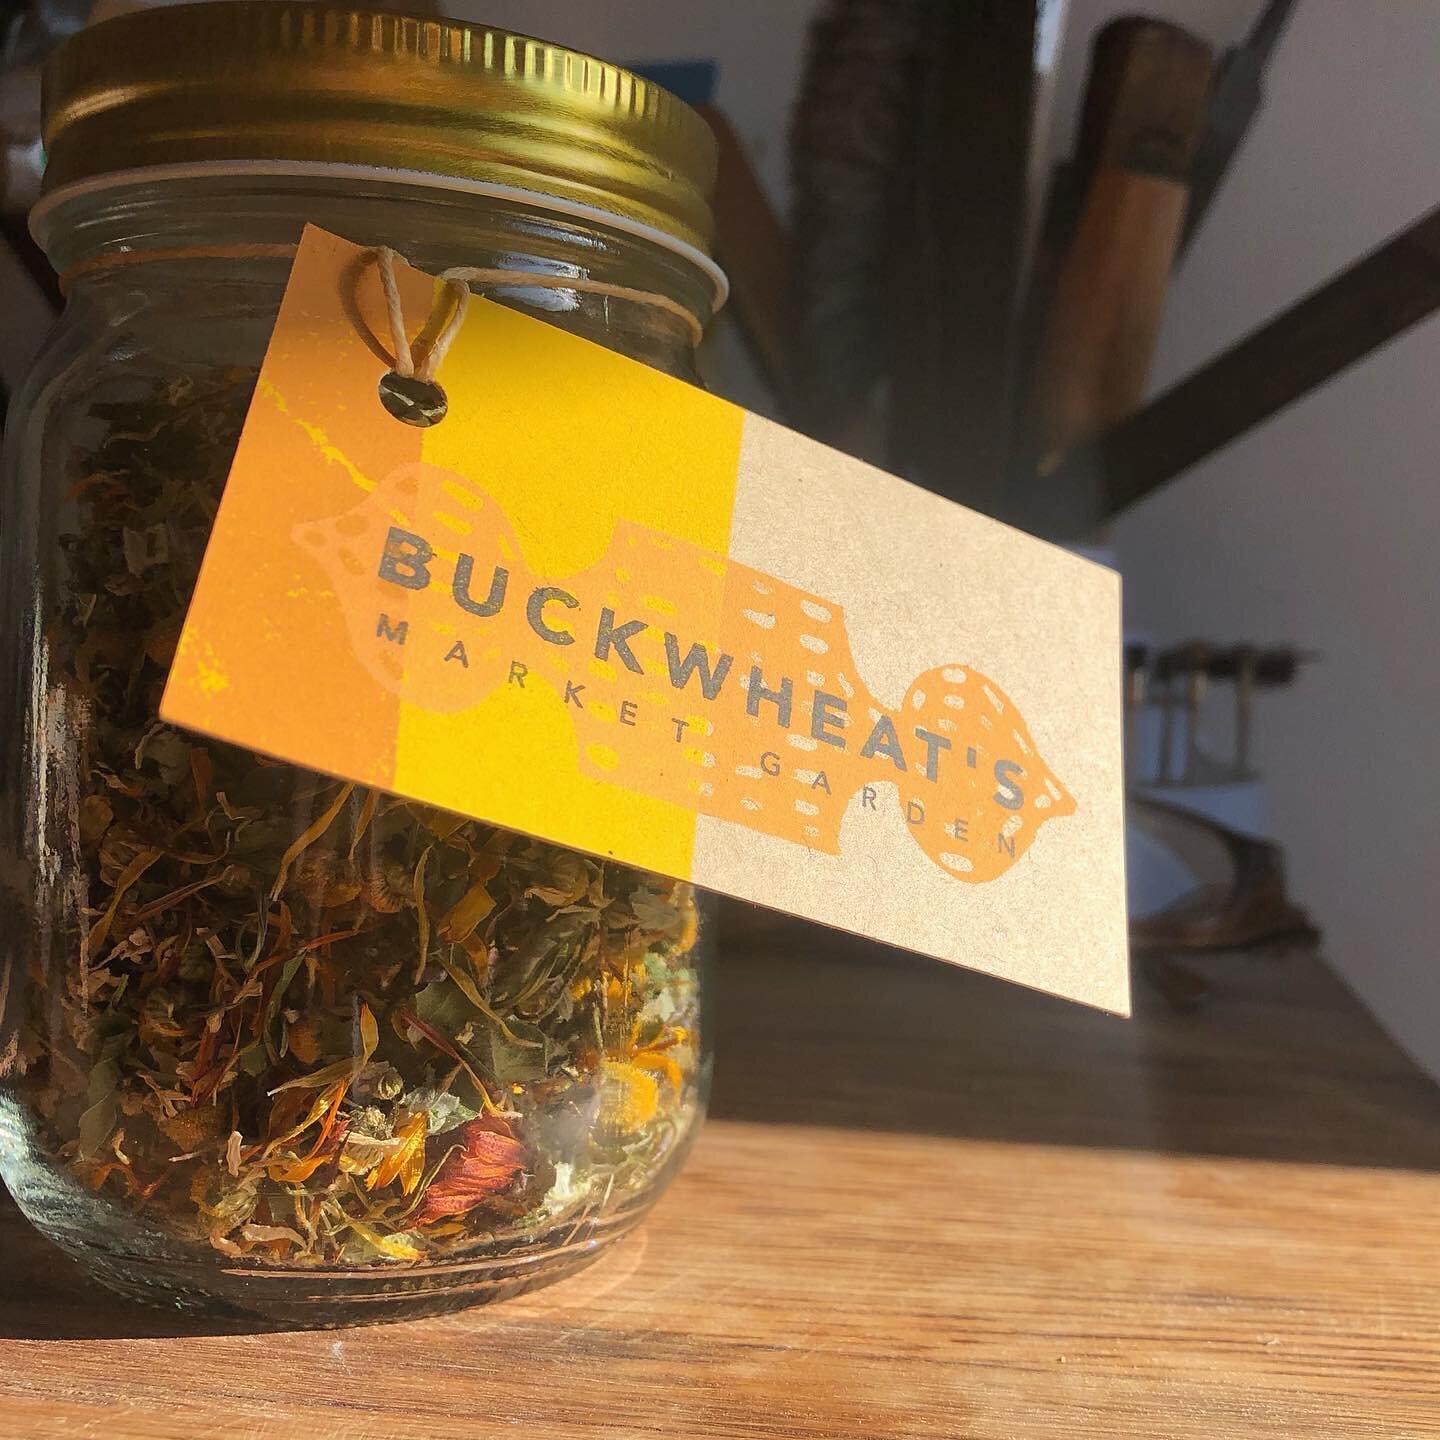 Taking advantage of this gr8 lighting to self promote 🙃 @buck.wheats is selling small batches of farm grown / farm foraged tea for the holidays! Flavors are classic chamomile and a blend of chamomile, calendula, lavender, peppermint and wild raspber